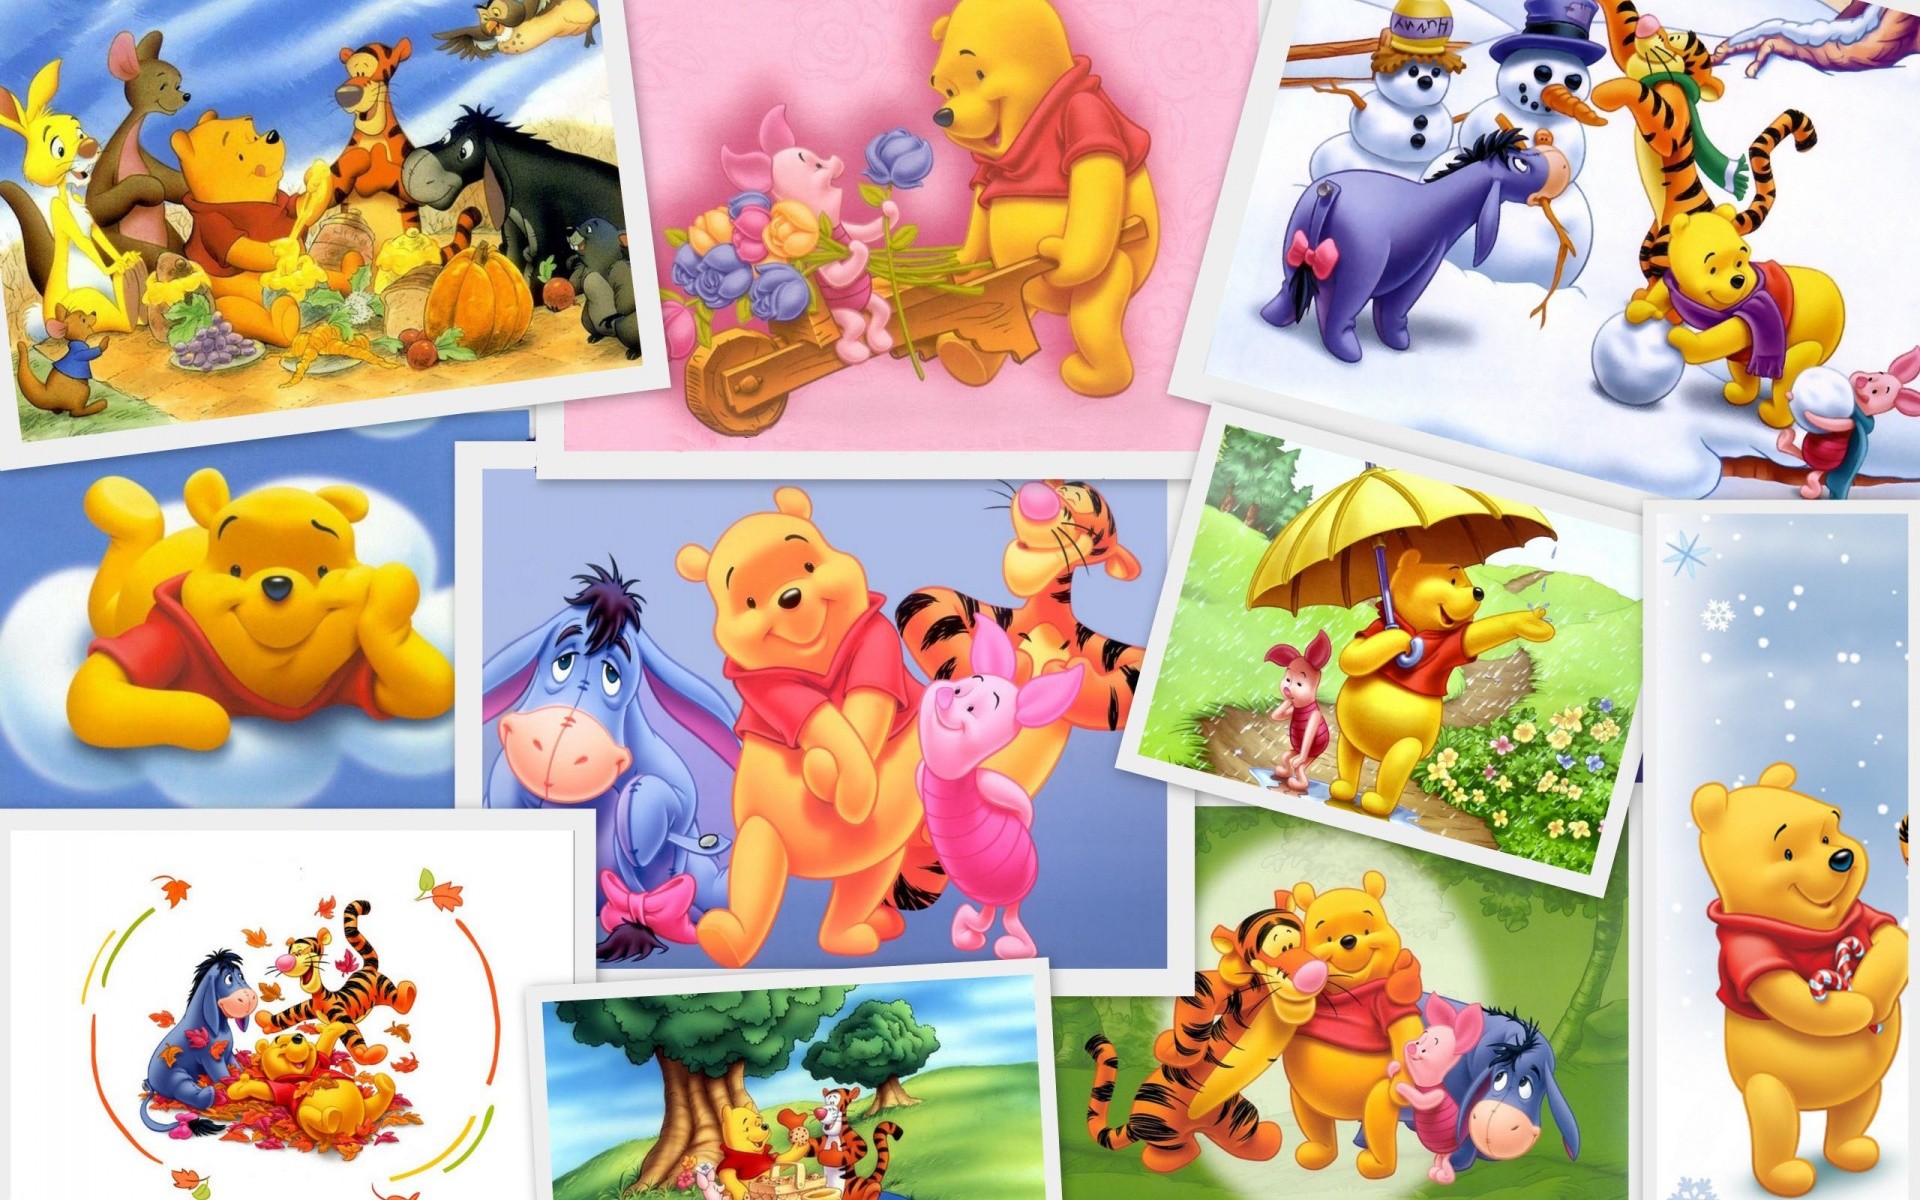 1920x1200 Winnie The Pooh Wallpapers HD collage